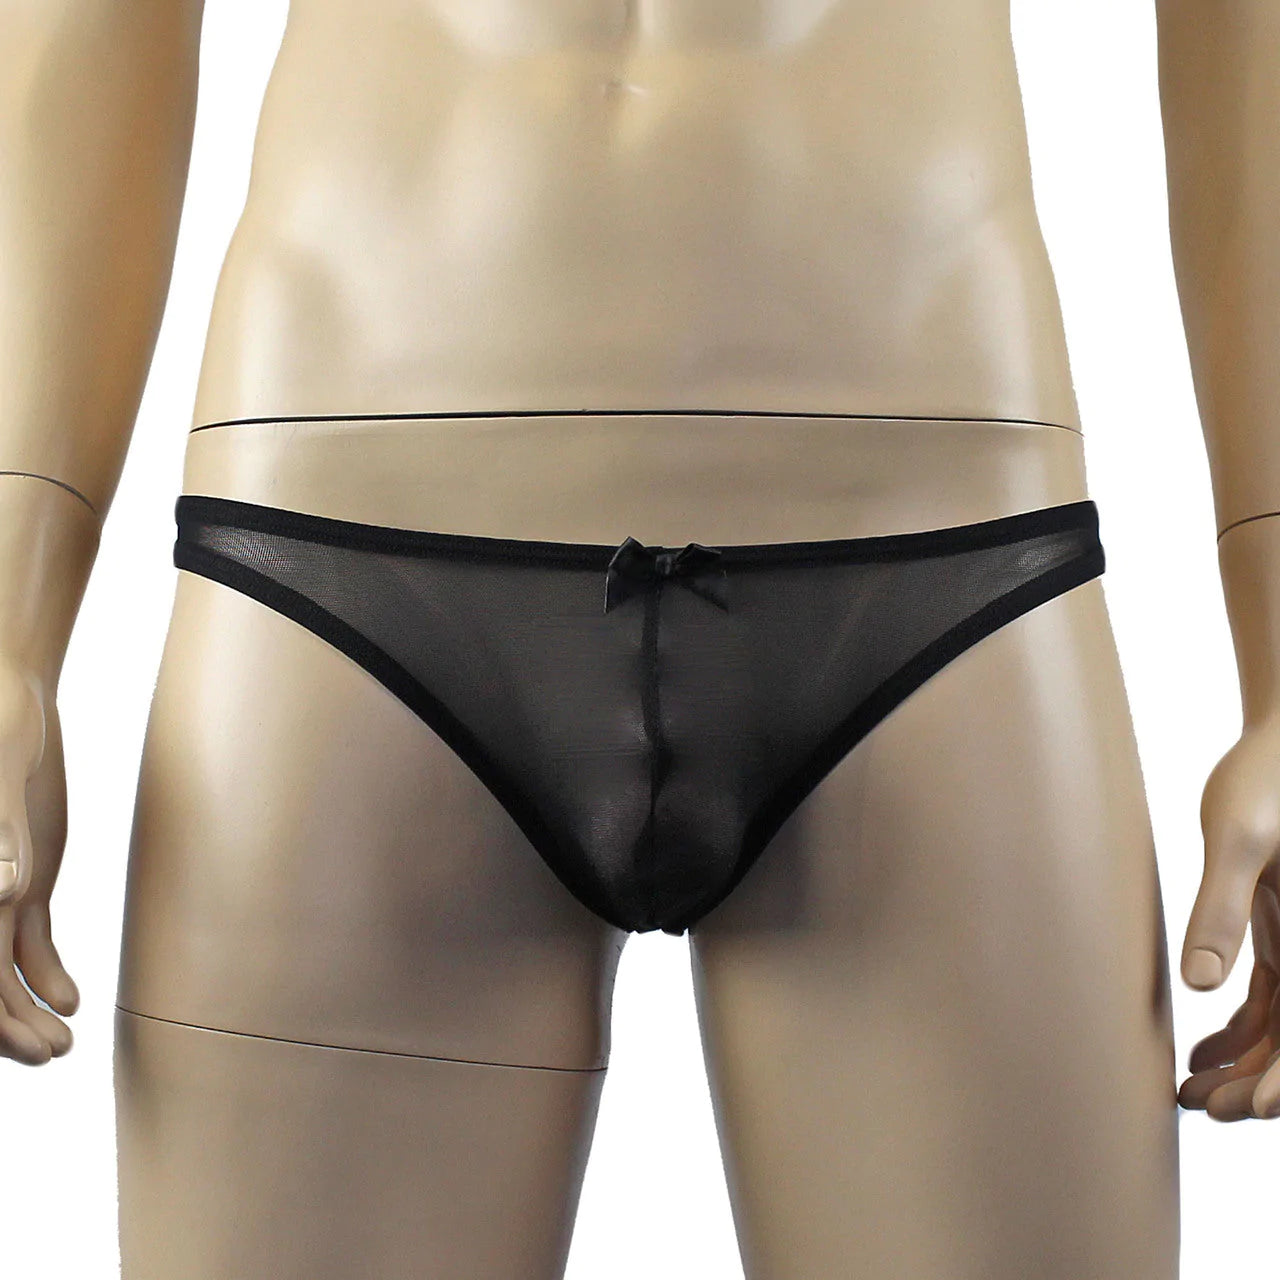 SALE - Mens Exotic Sheer Mesh Brief with Bow Front Black